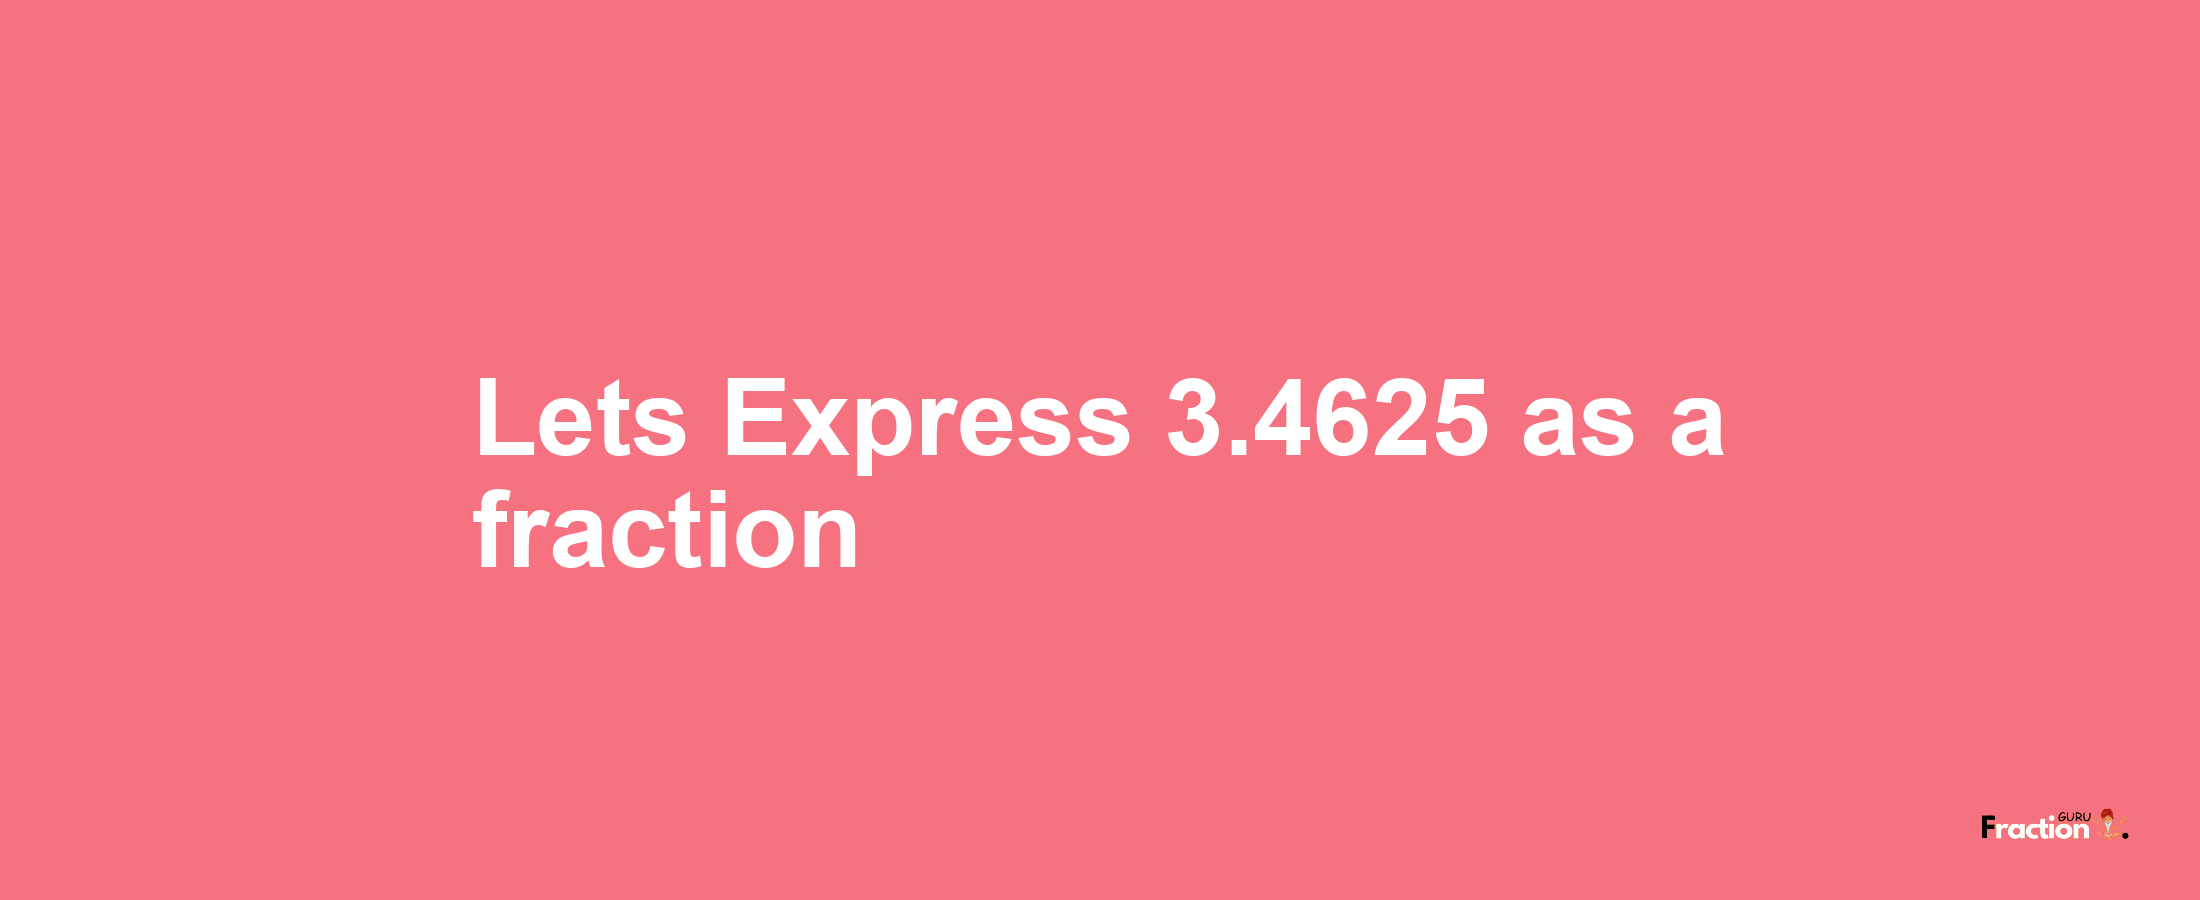 Lets Express 3.4625 as afraction